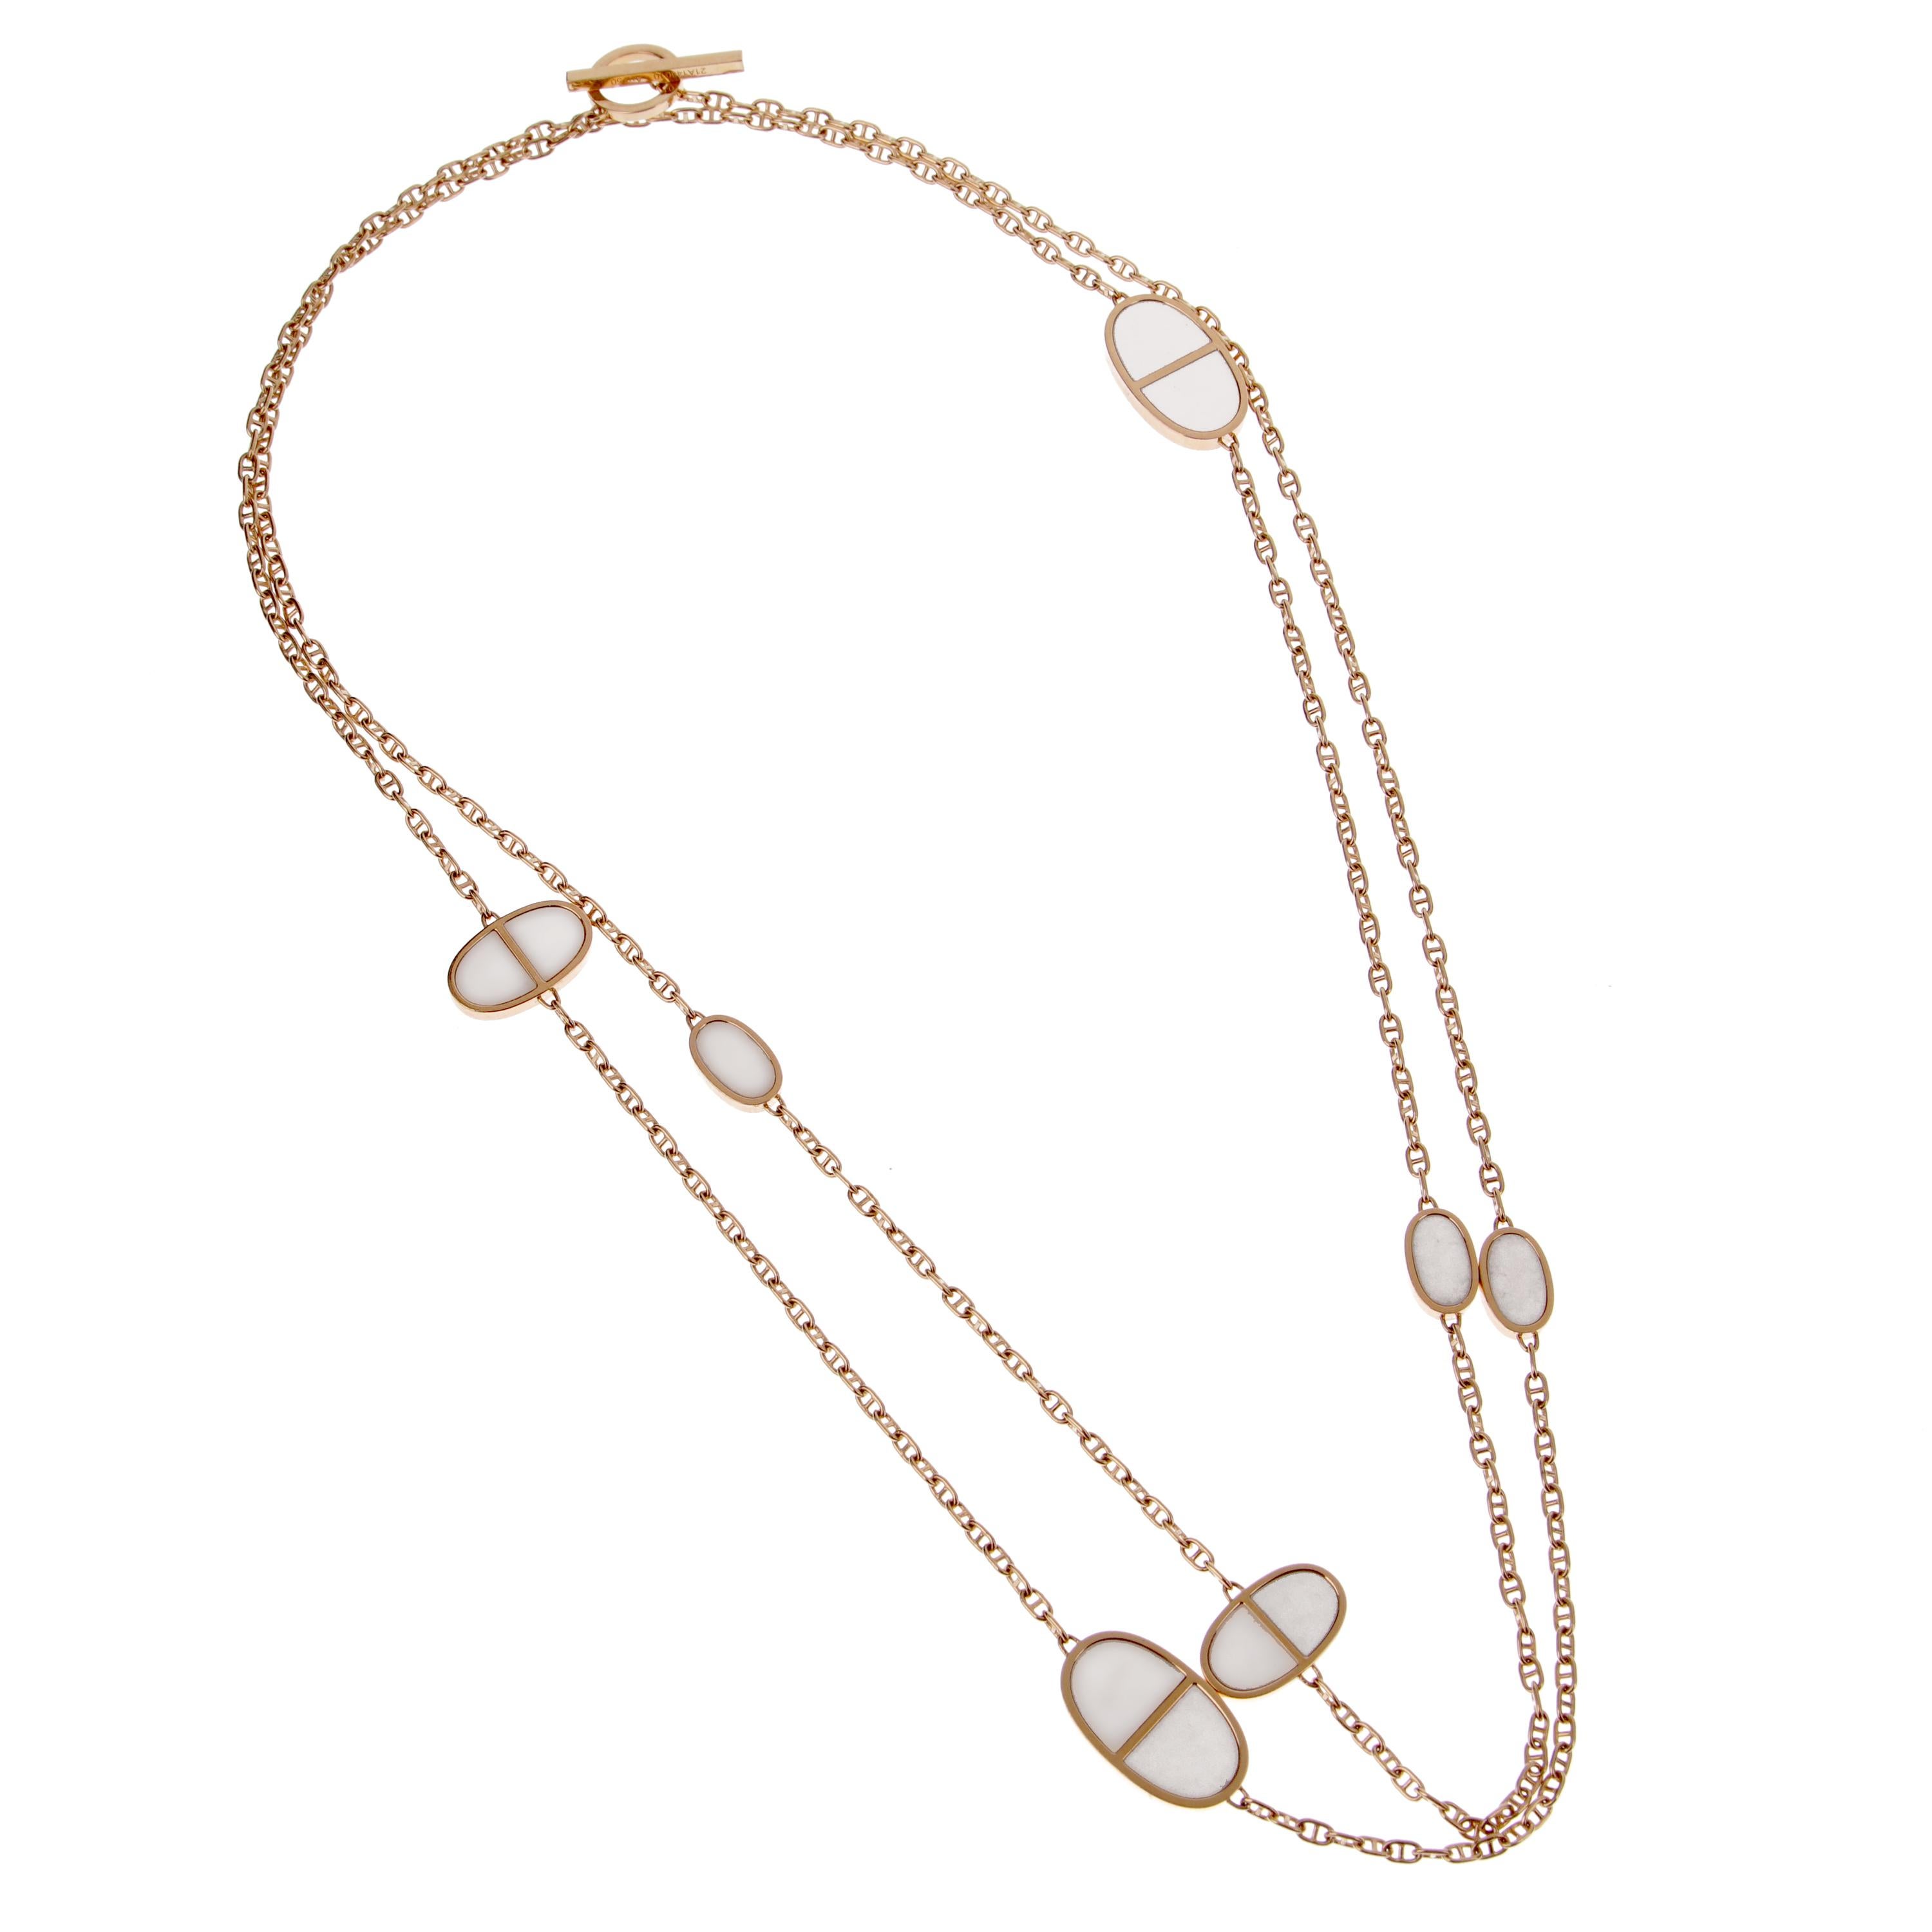 The Hermès Rose Gold Ceramic Sautoir Necklace is a striking piece of jewelry that beautifully merges the timeless elegance of Hermès with contemporary design elements. This exquisite necklace, measuring an impressive 40 inches in length, offers